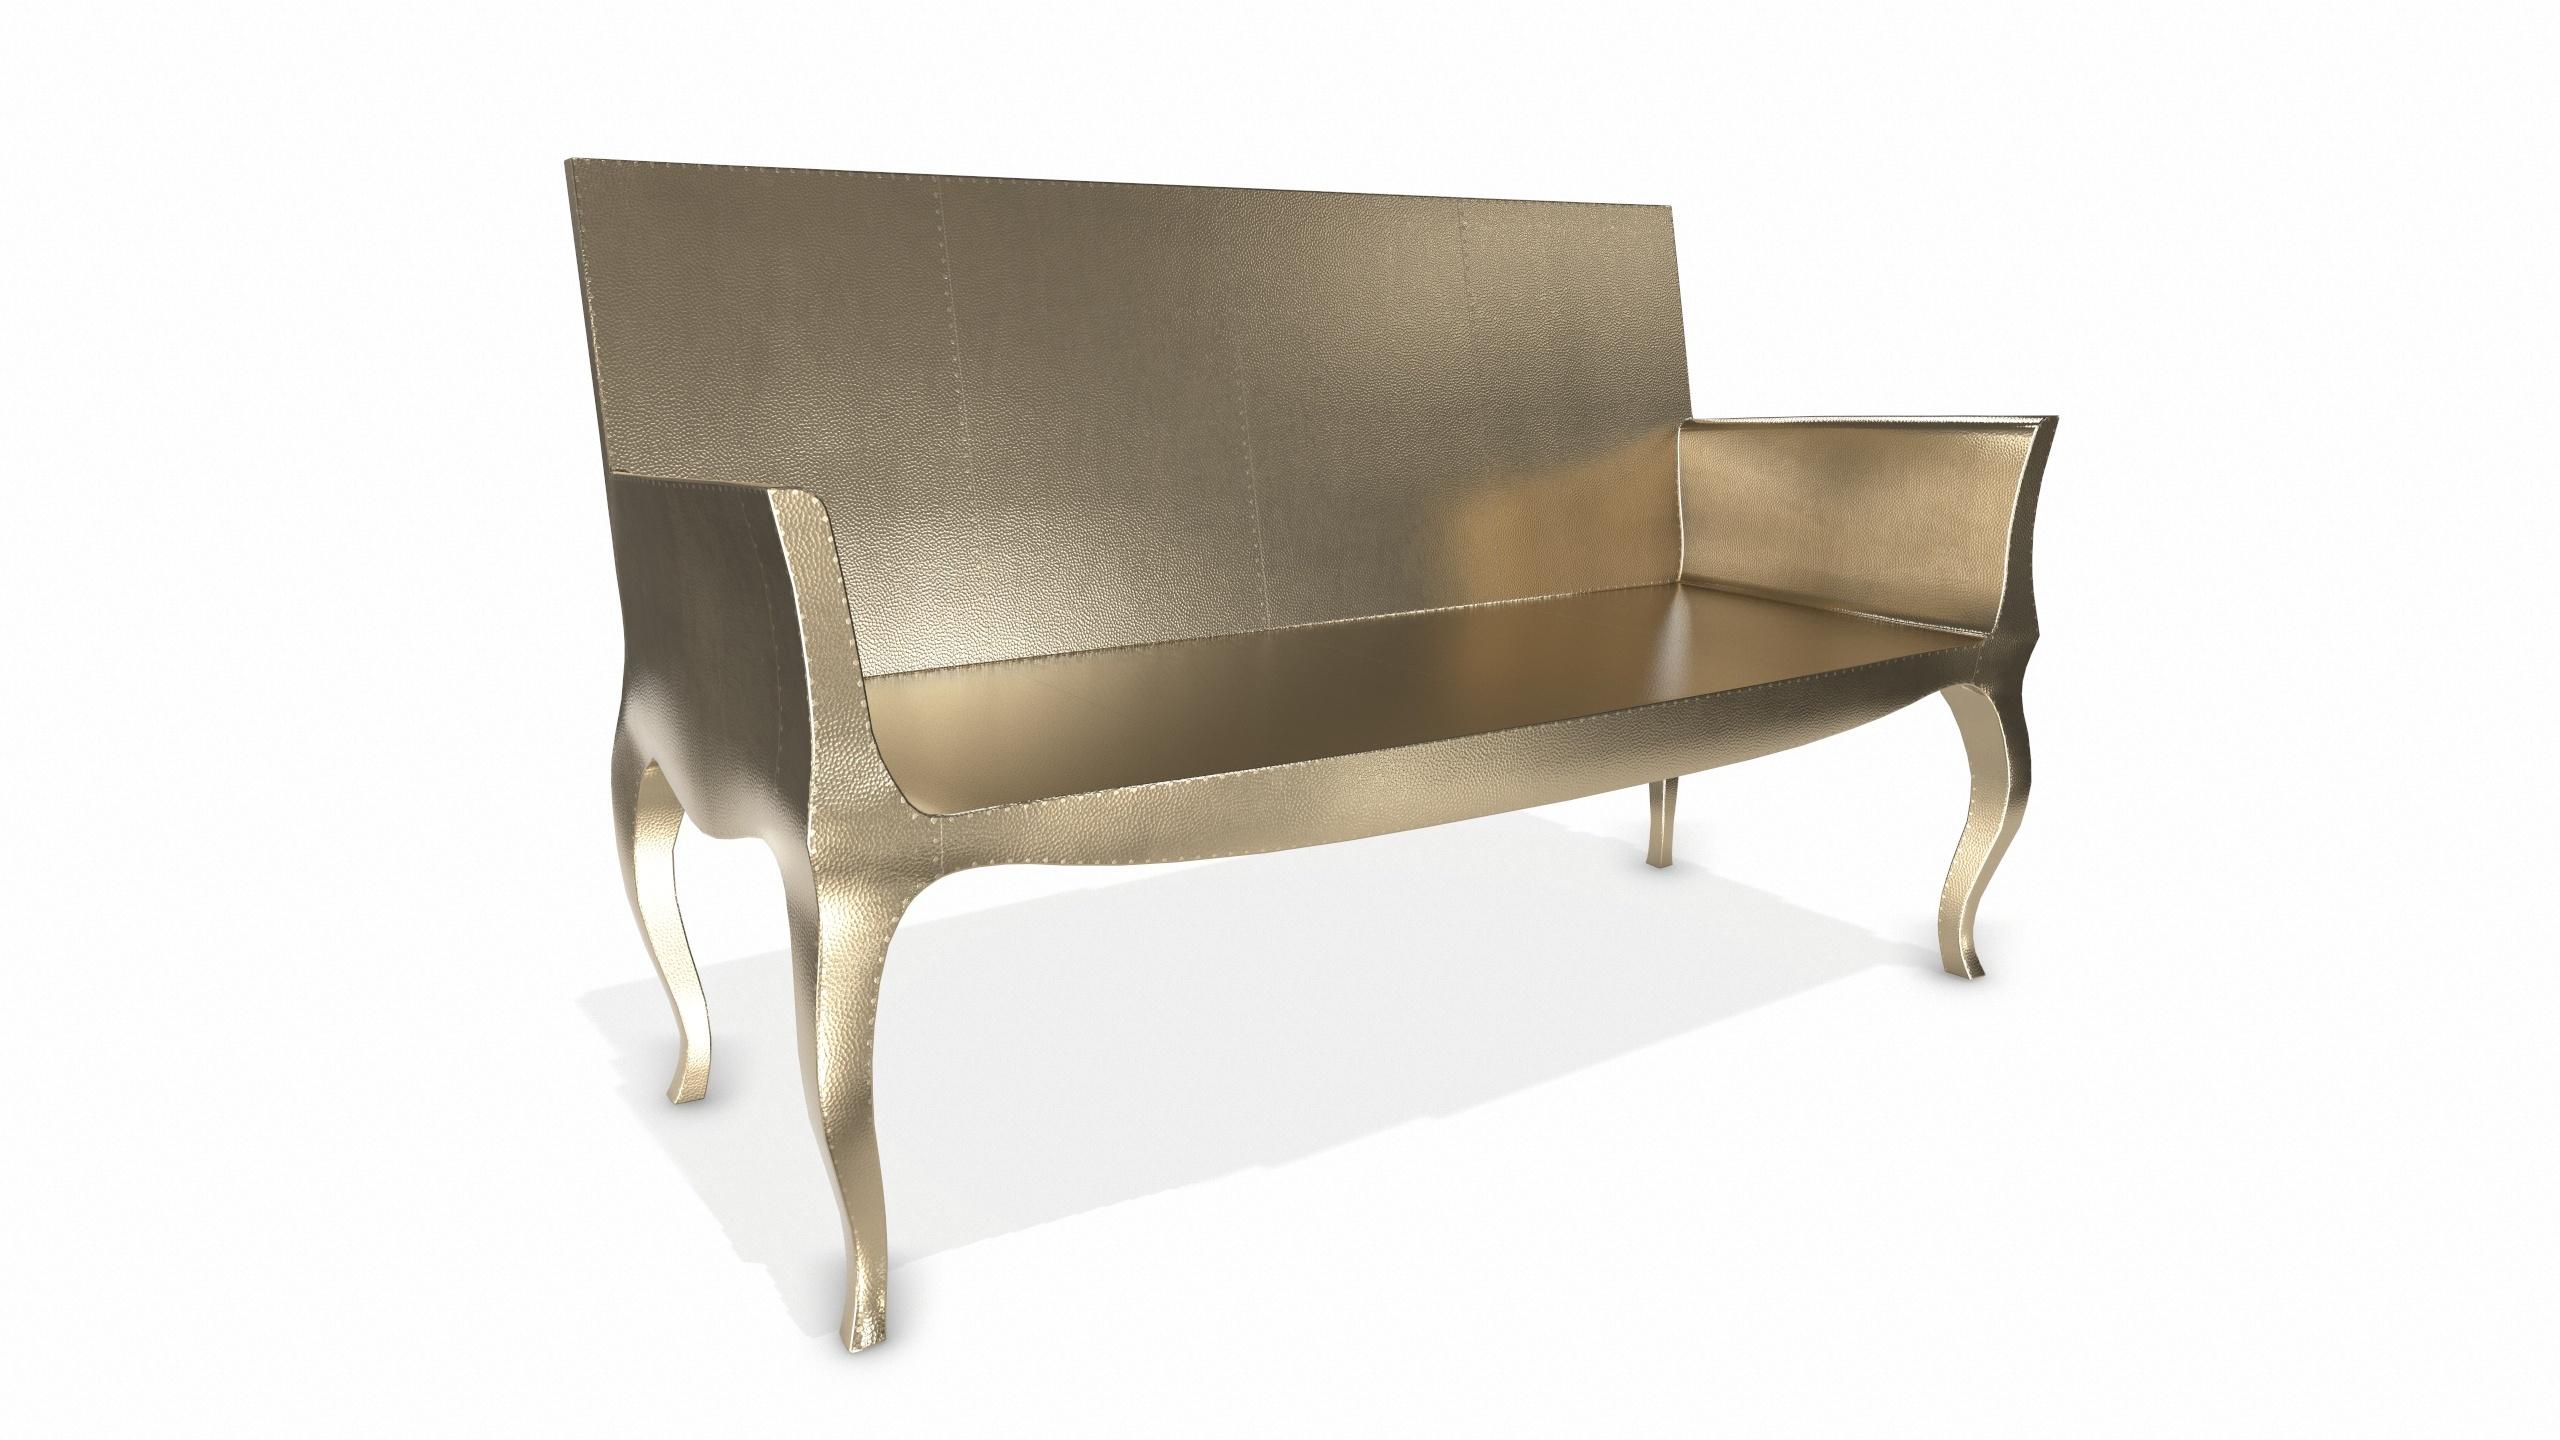 Contemporary Louise Settee Art Deco Chaise Longues in Mid. Hammered Brass by Paul Mathieu For Sale